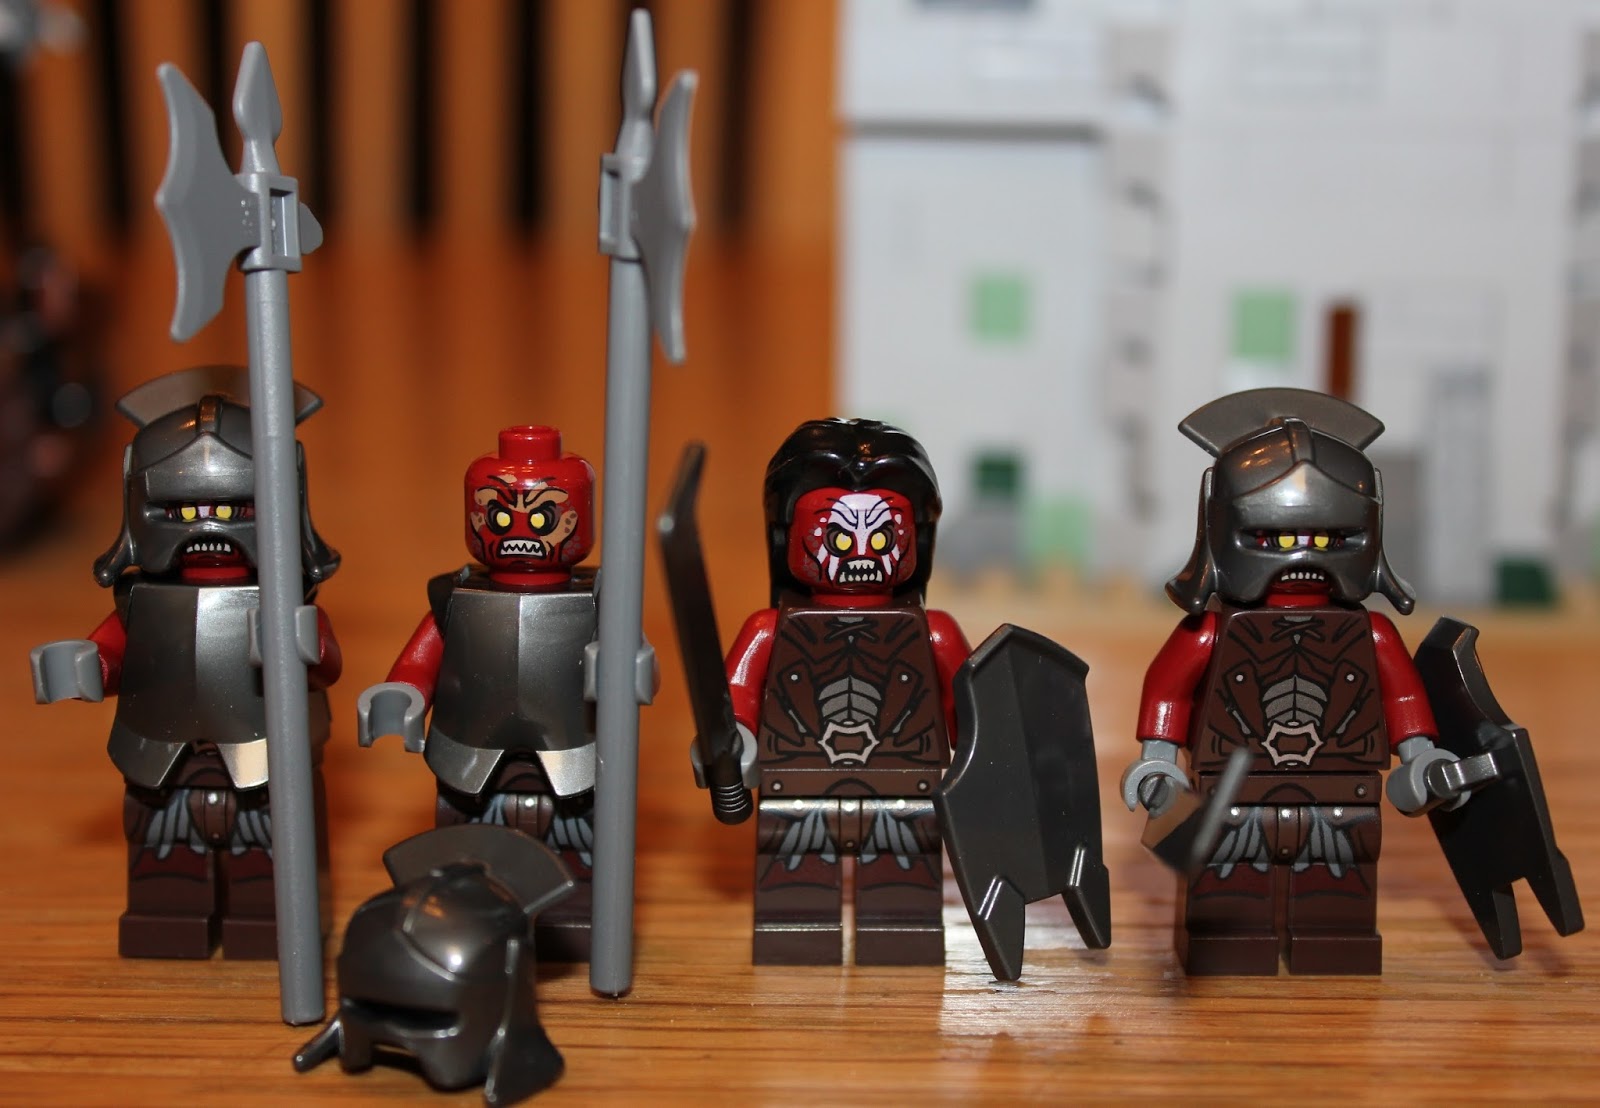 Sons of Twilight Lego Lord of the Rings UrukHai Army